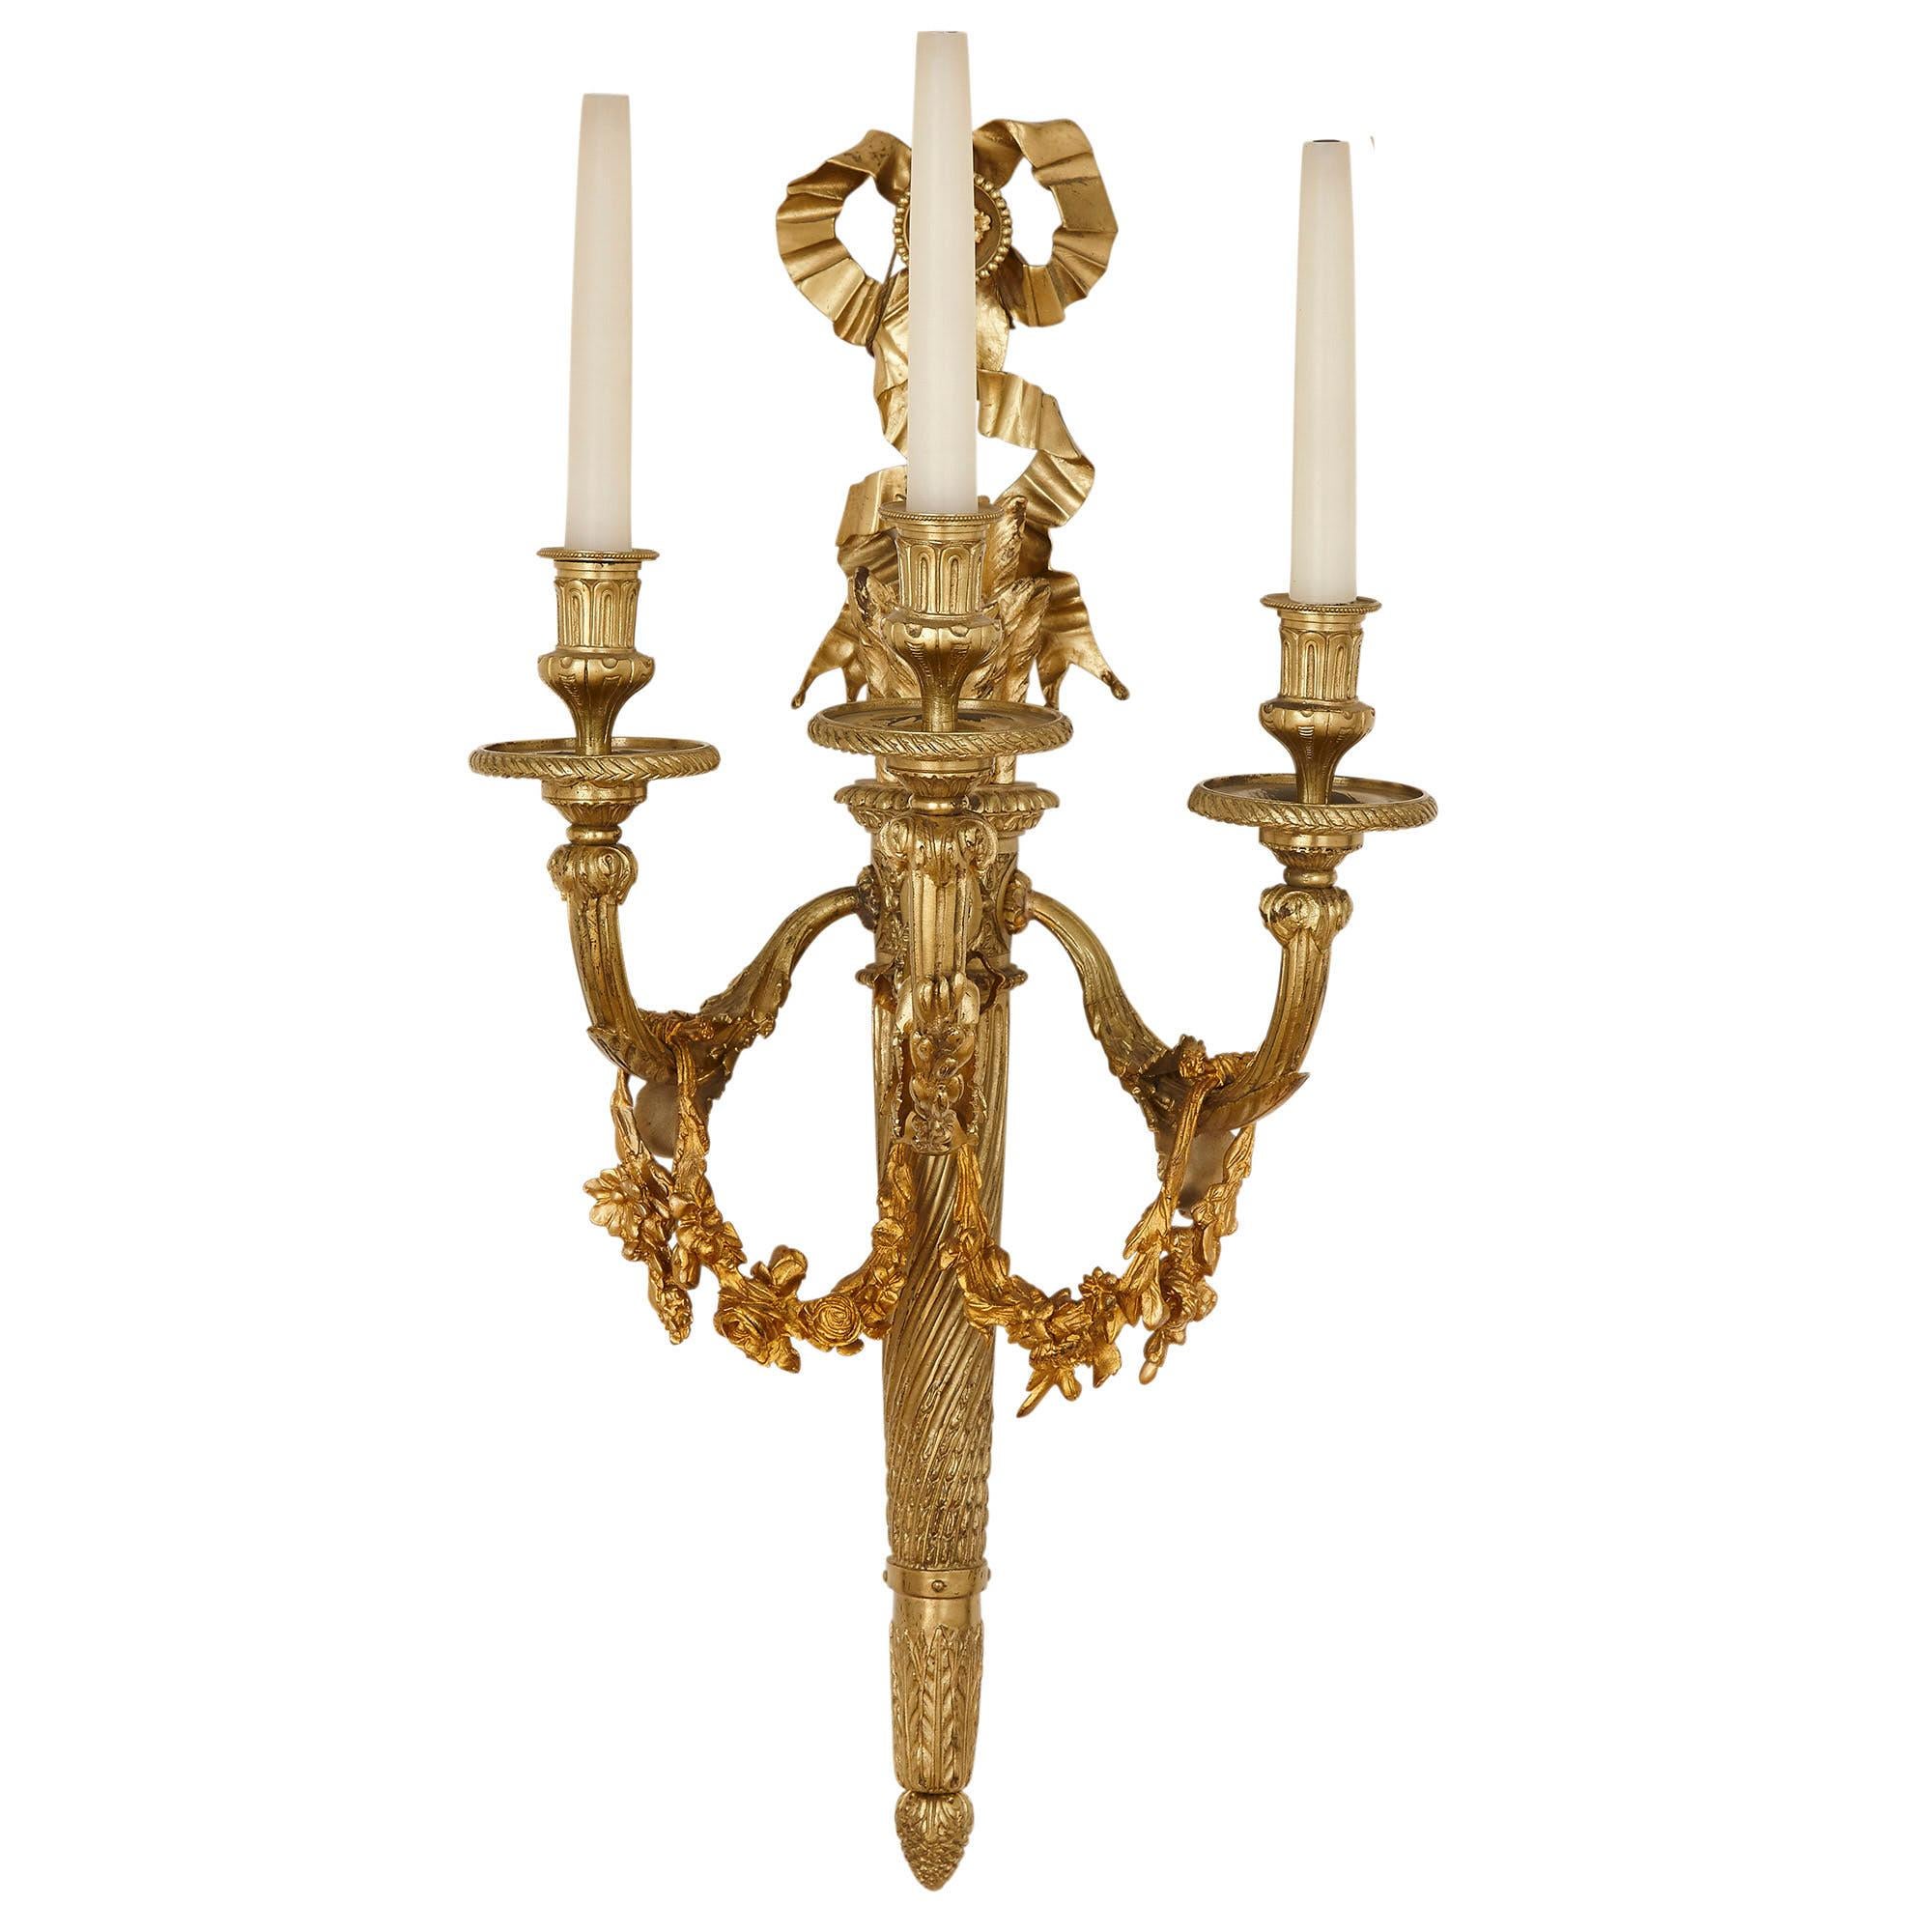 Pair of neoclassical style gilt bronze three-light sconces
French, 19th century
Measures: Height 75cm, width 37cm, depth 30cm

The sconces in this pair are after a famous model by Pierre-François Feuchère, one of the leading craftsmen of the